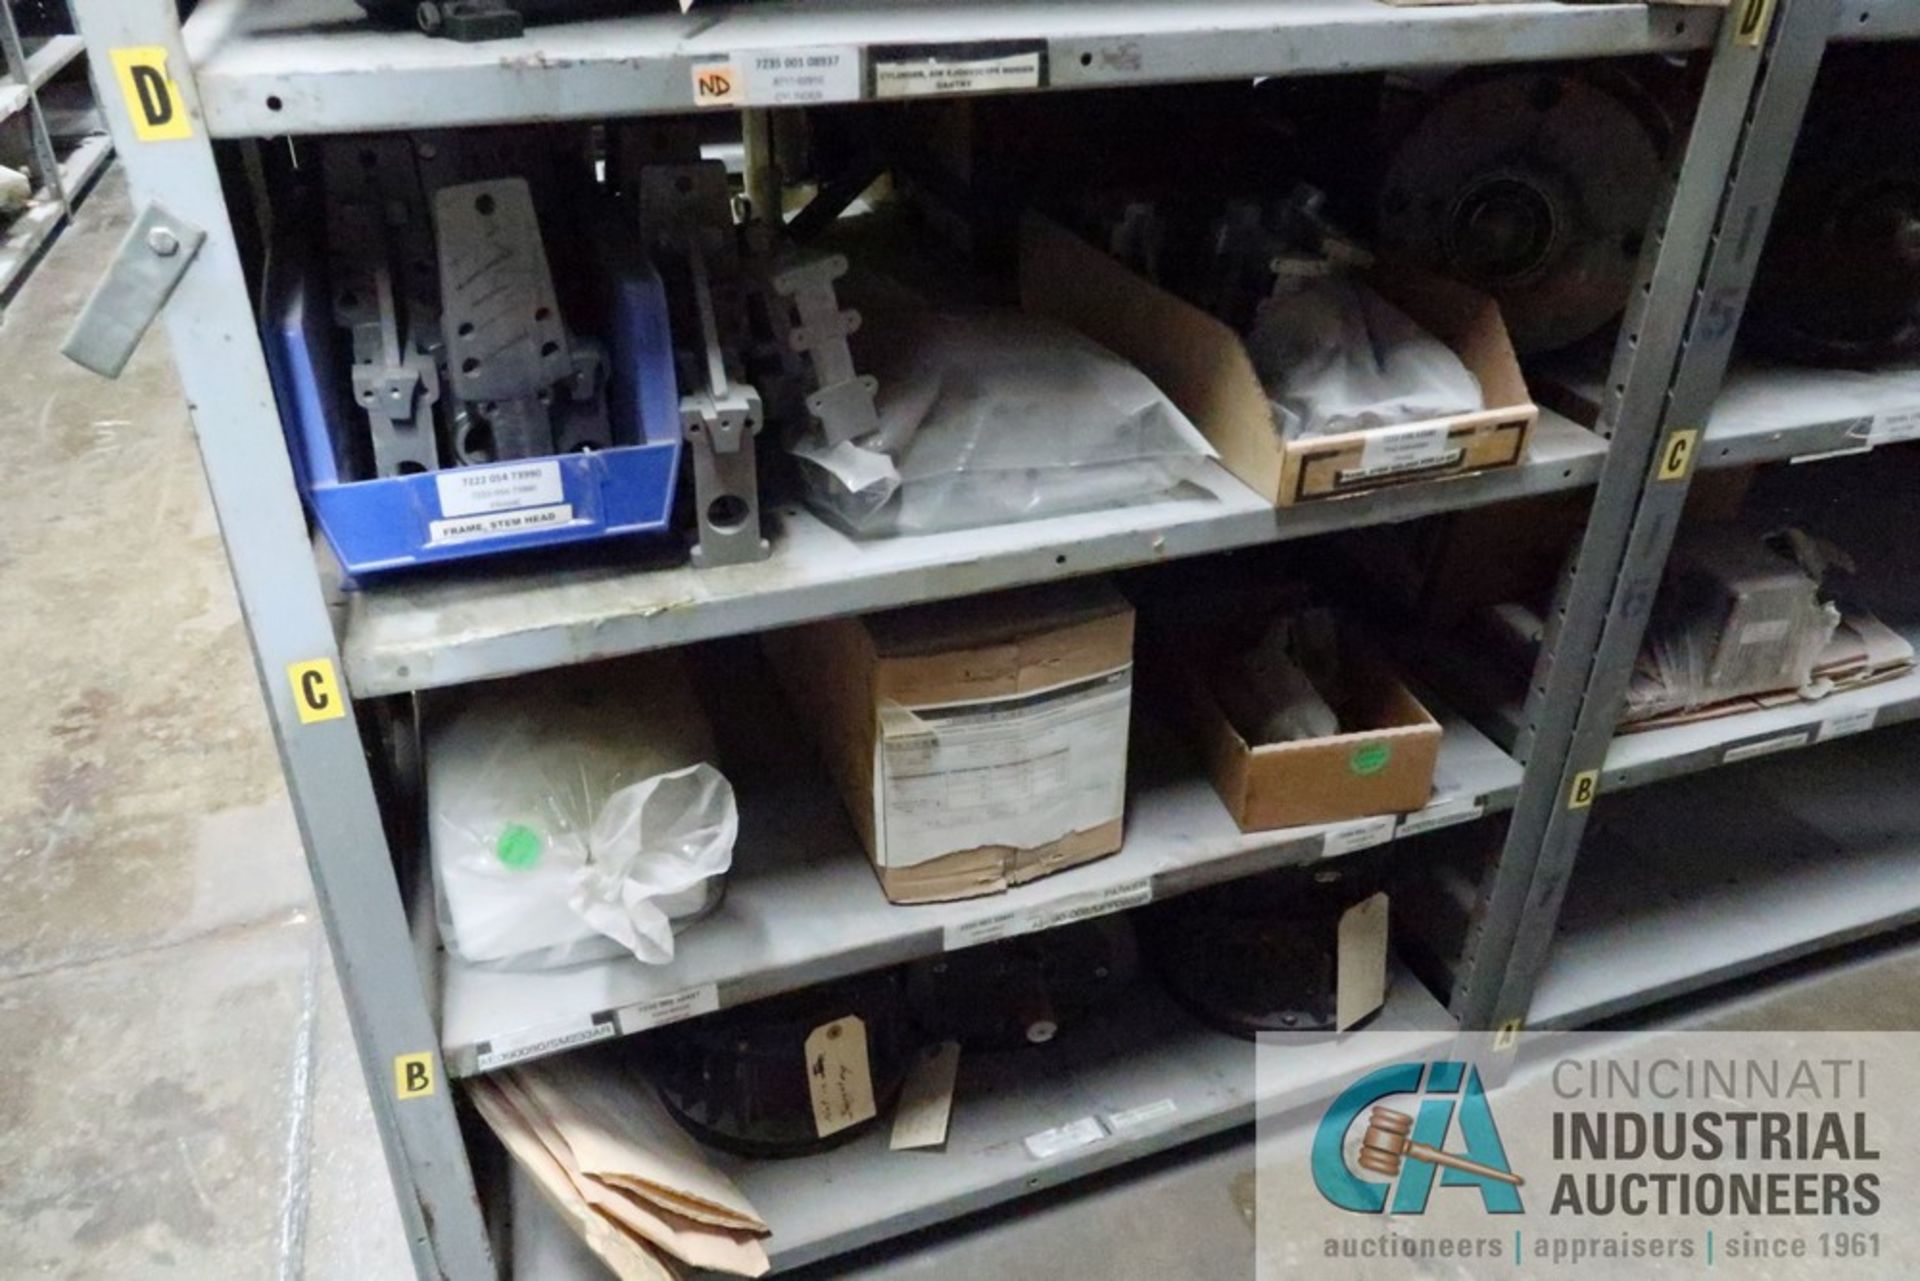 (LOT) (8) SECTIONS STEEL SHELVING W/ MISC. MODULES, CONTROLLERS, VELDING SYSTEMS, PUMPS, LIGHT - Image 11 of 16